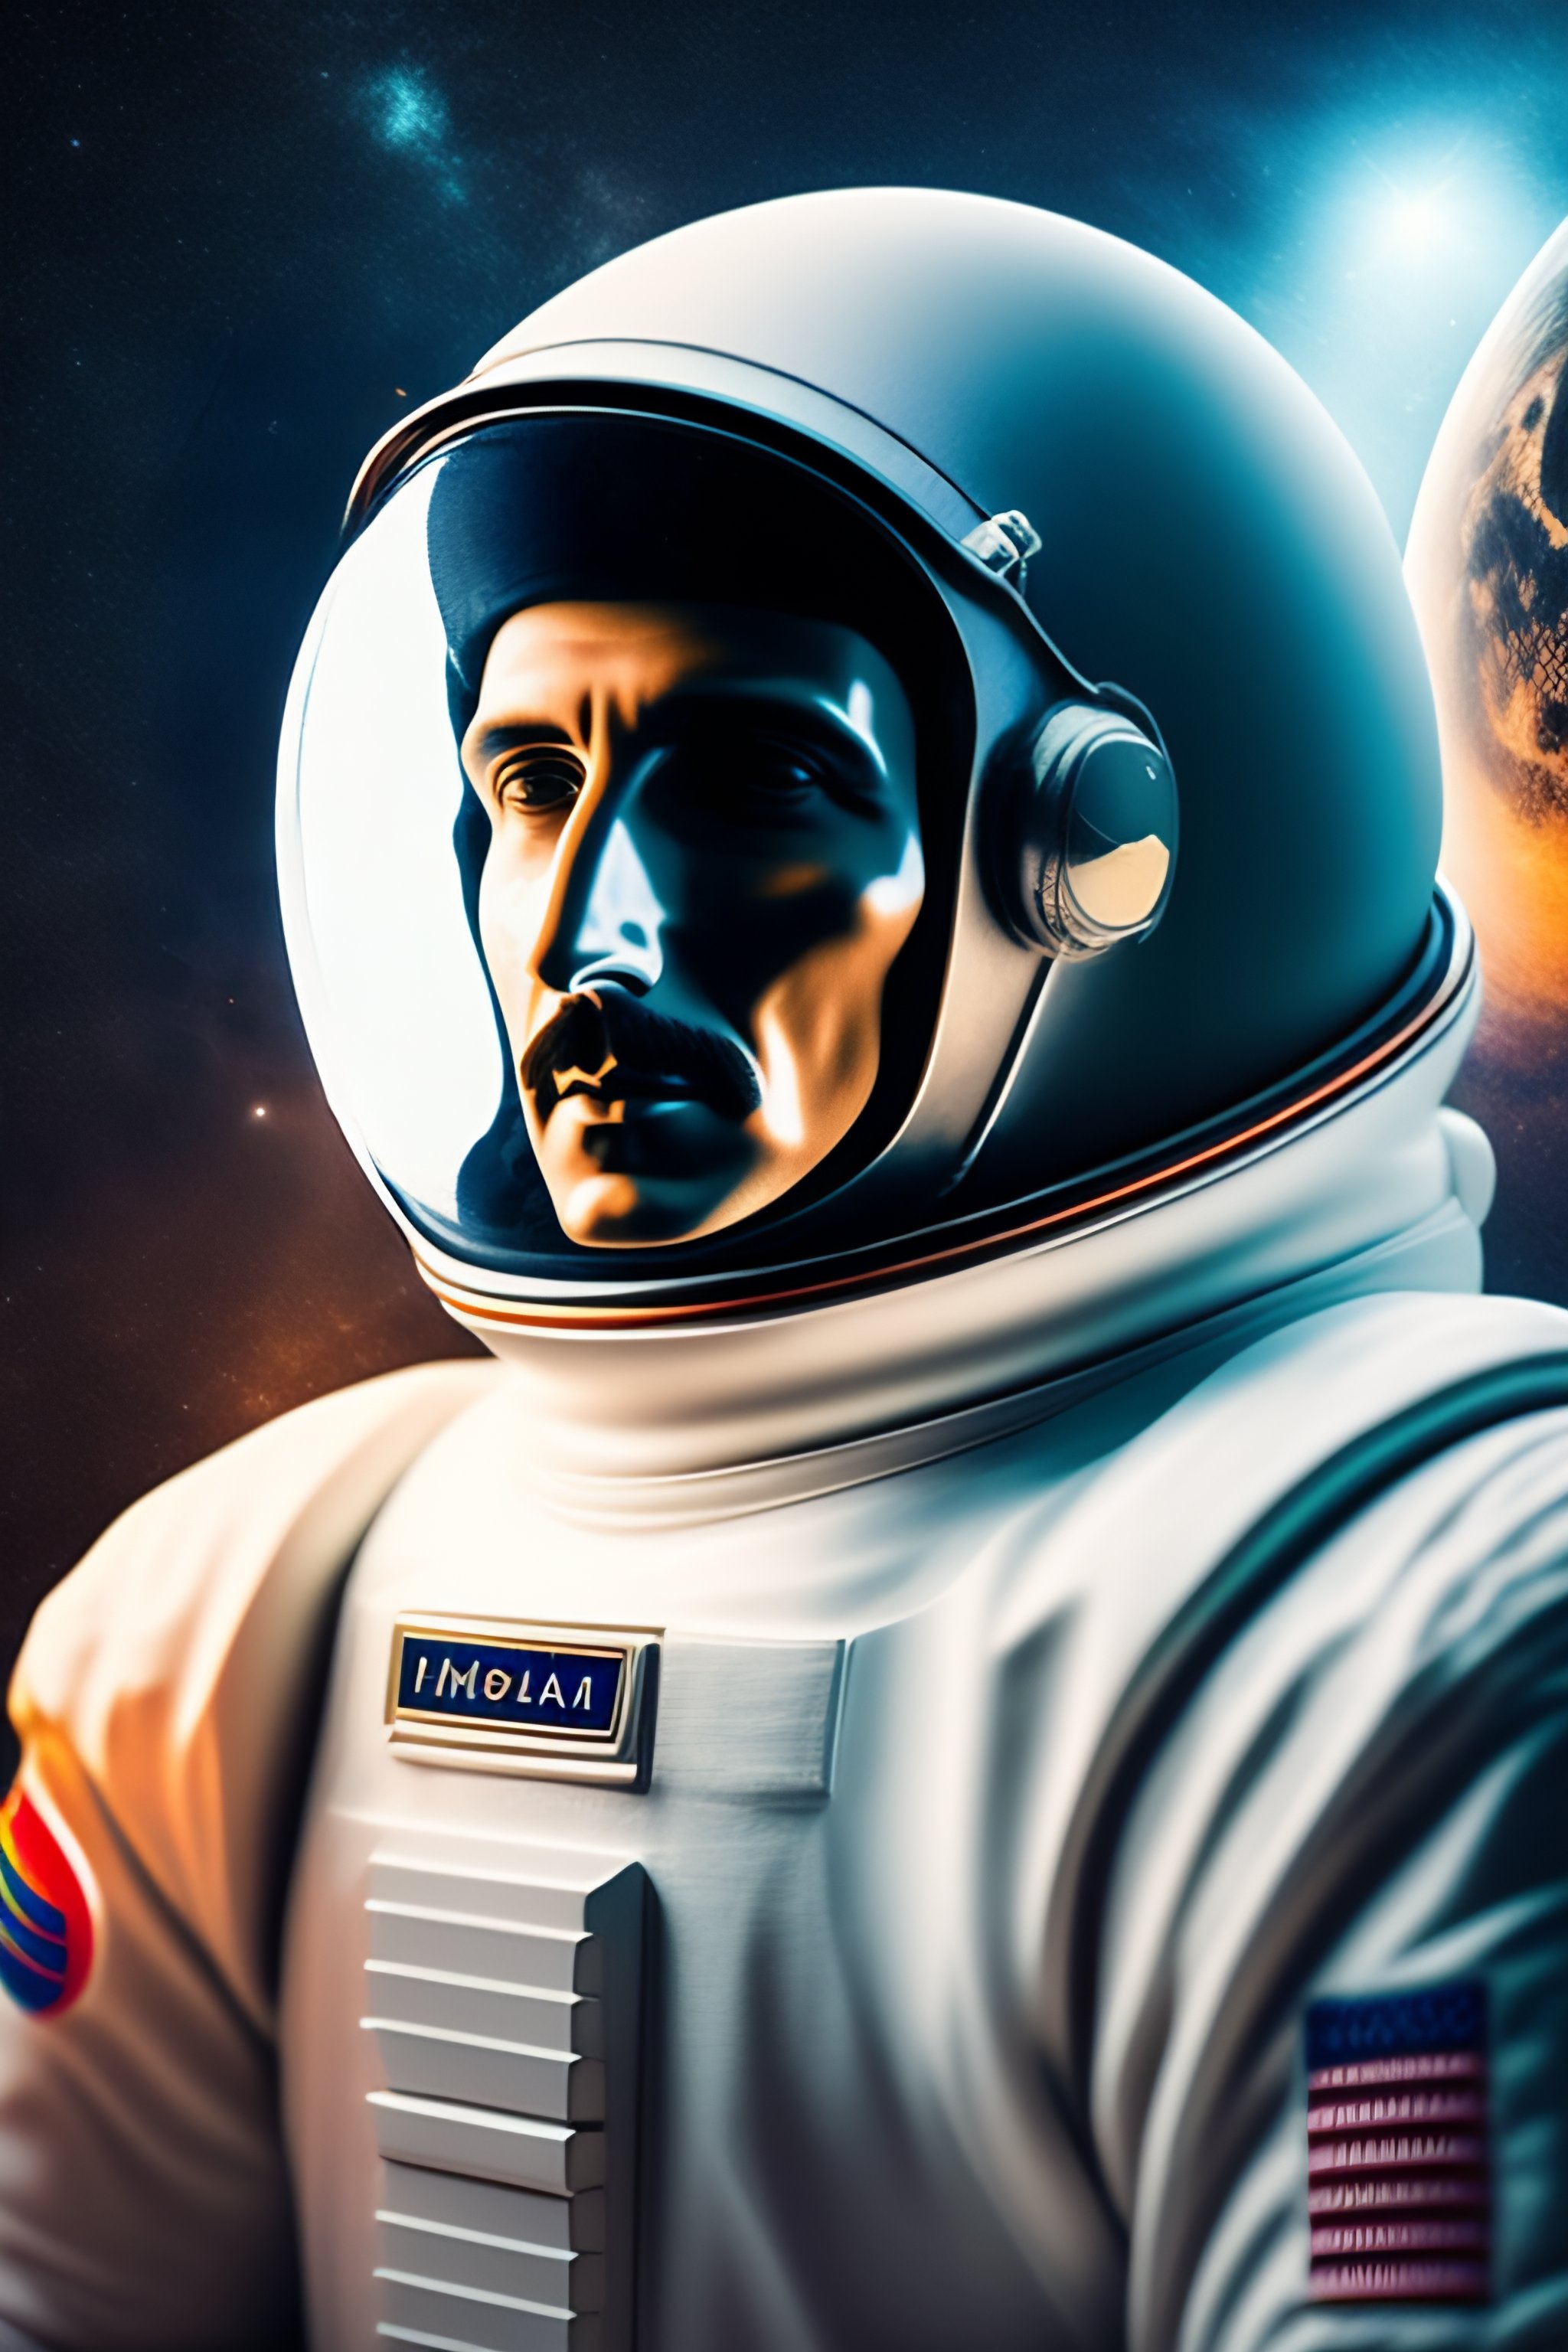 Lexica - A 3D paniting of Nikola Tesla in moon wearing a Astronaut outfit